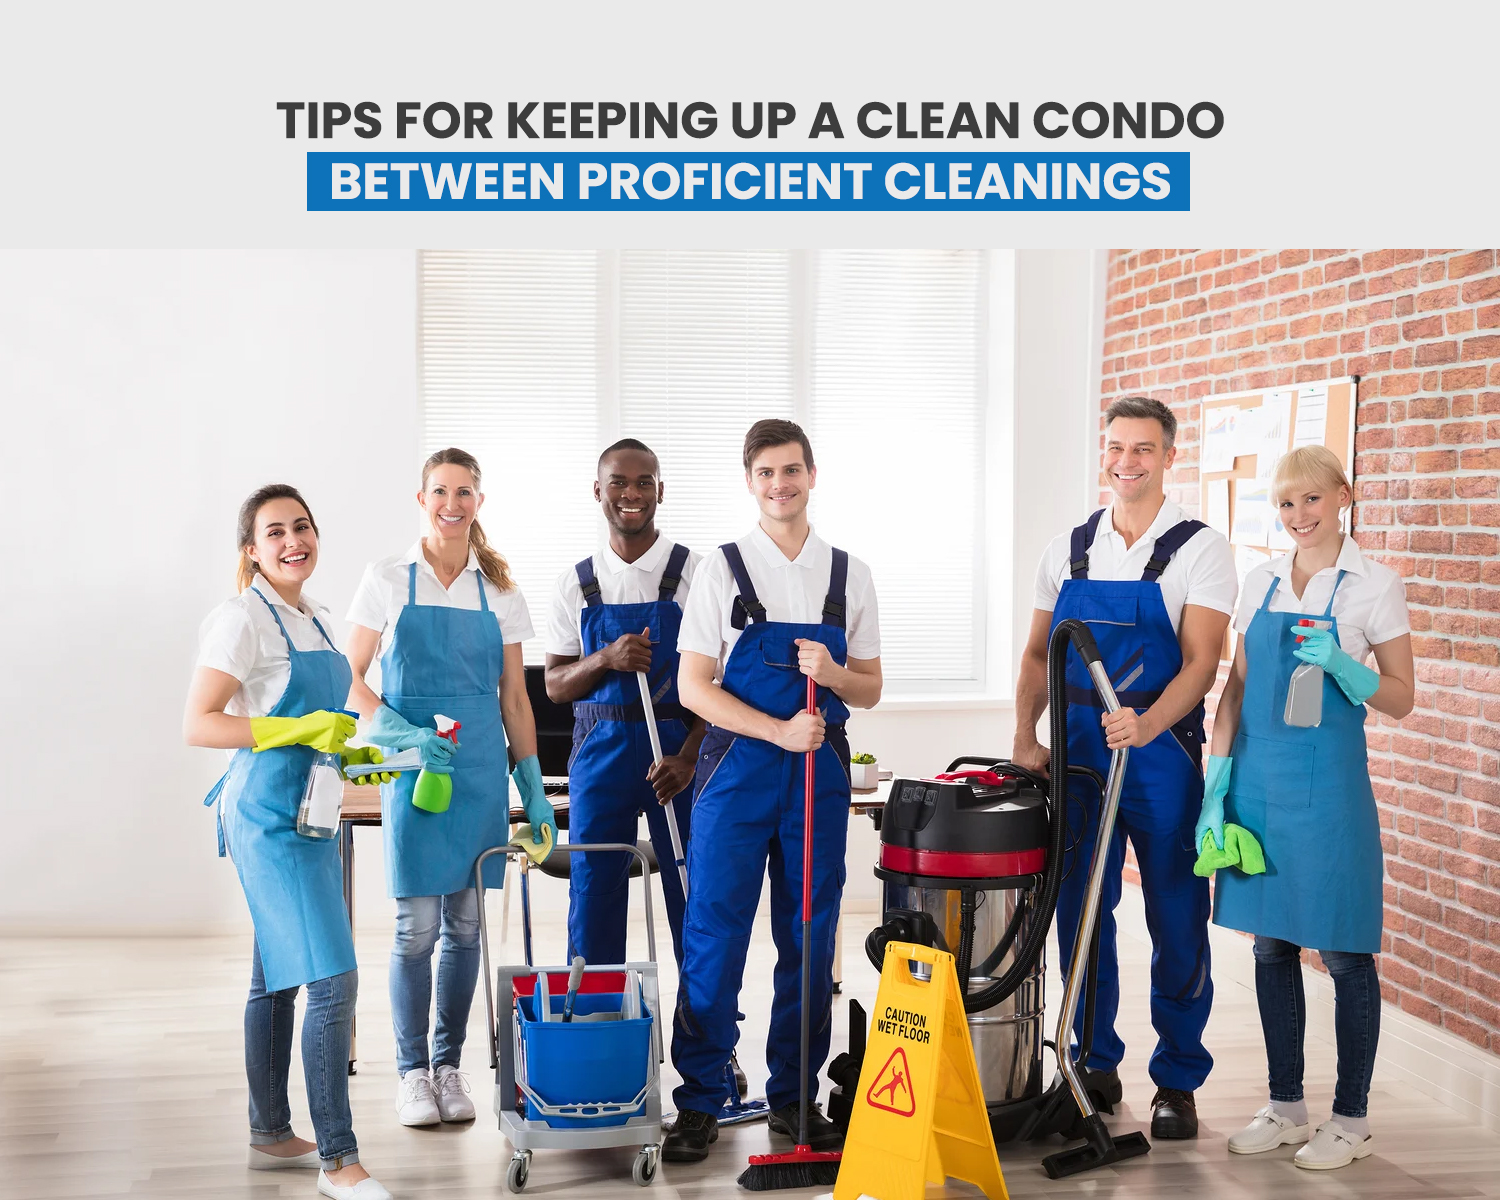 Tips For Keeping Up A Clean Condo Between Proficient Cleanings